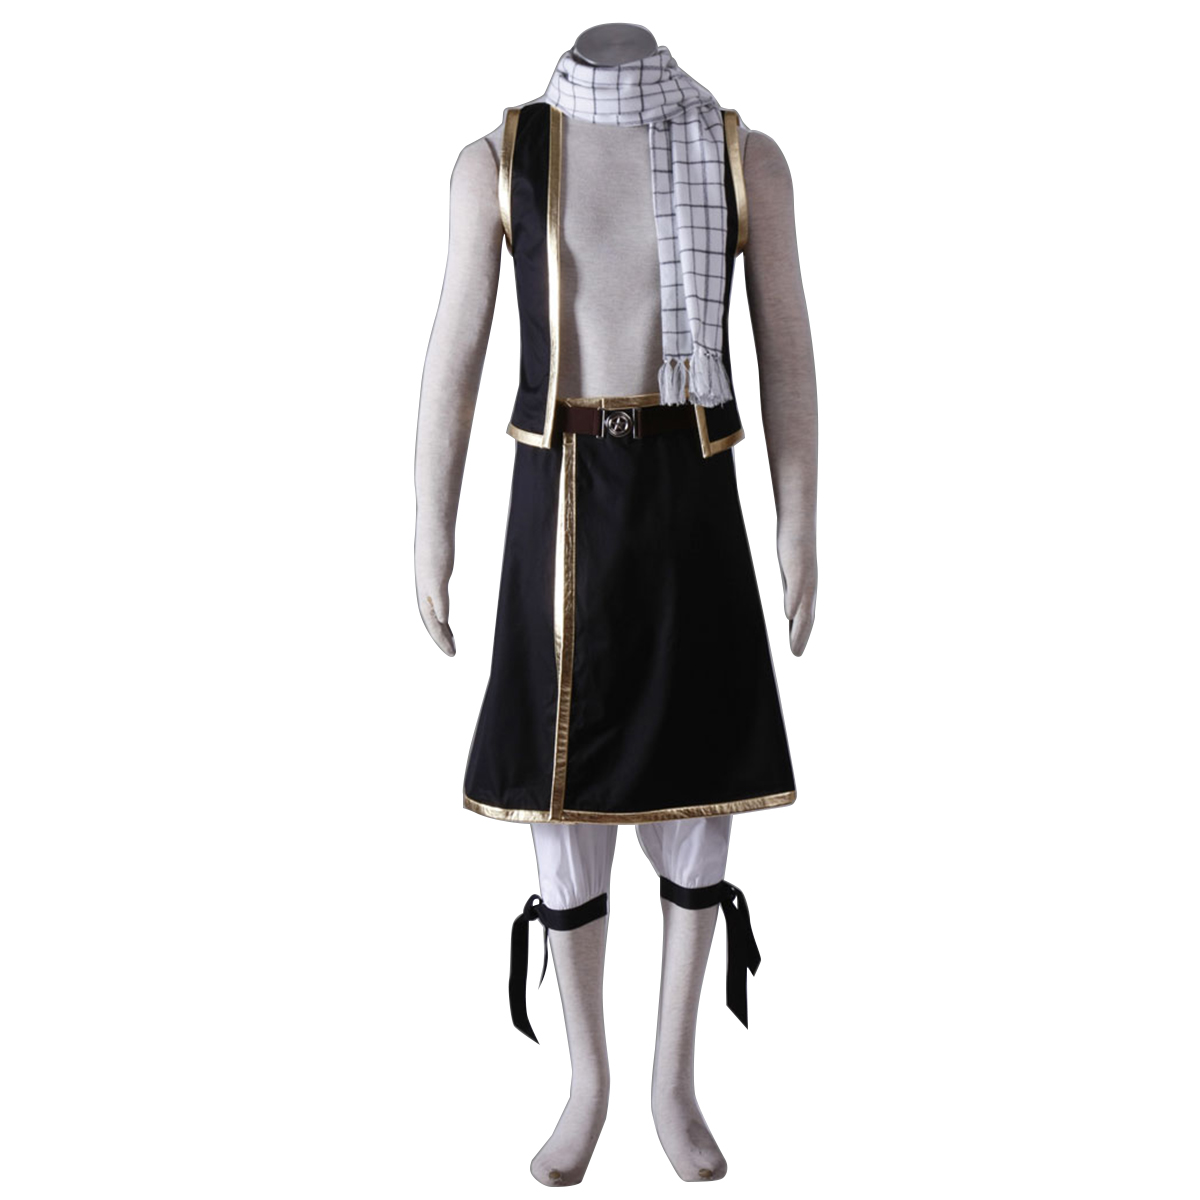 Fairy Tail Natsu Dragneel 1 Cosplay Costumes New Zealand Online Store